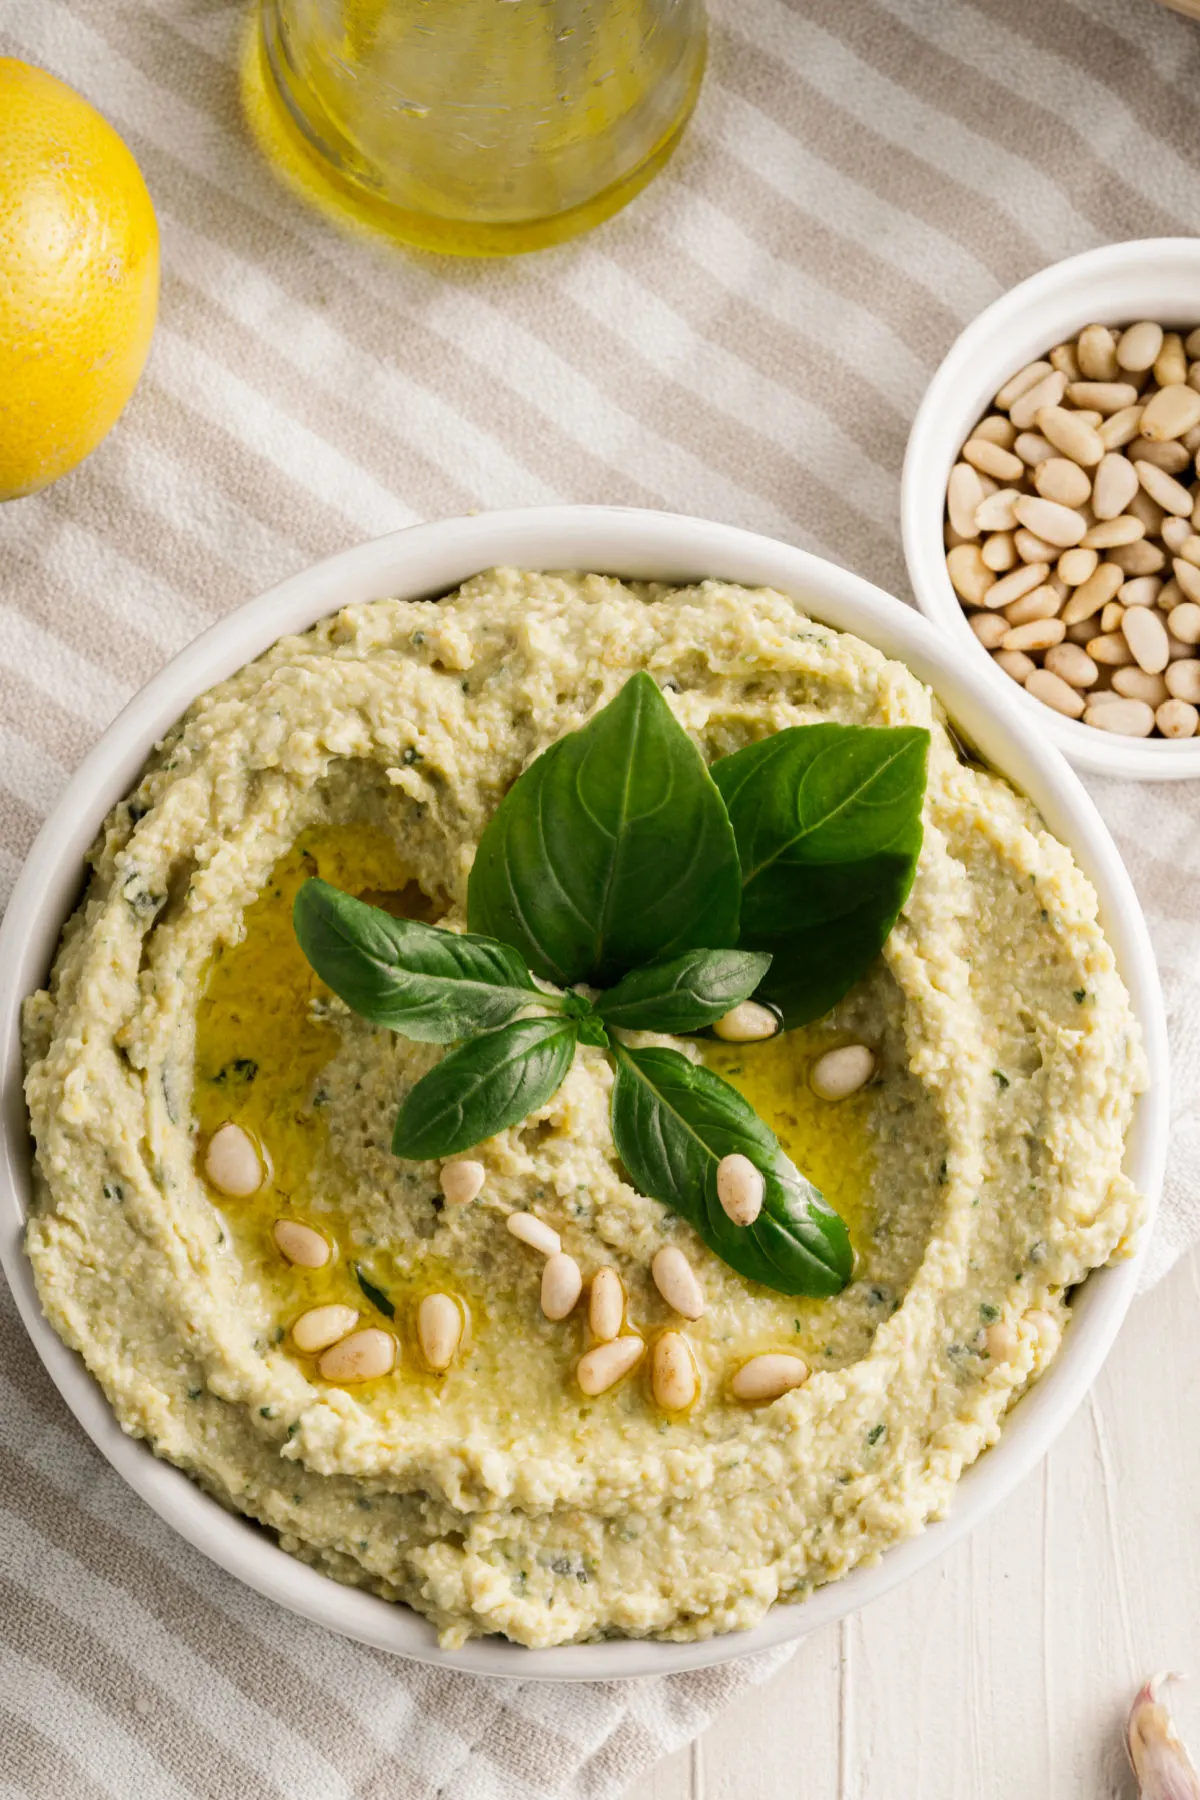 Pesto hummus in a bowl with basil and pine nuts for garnish.